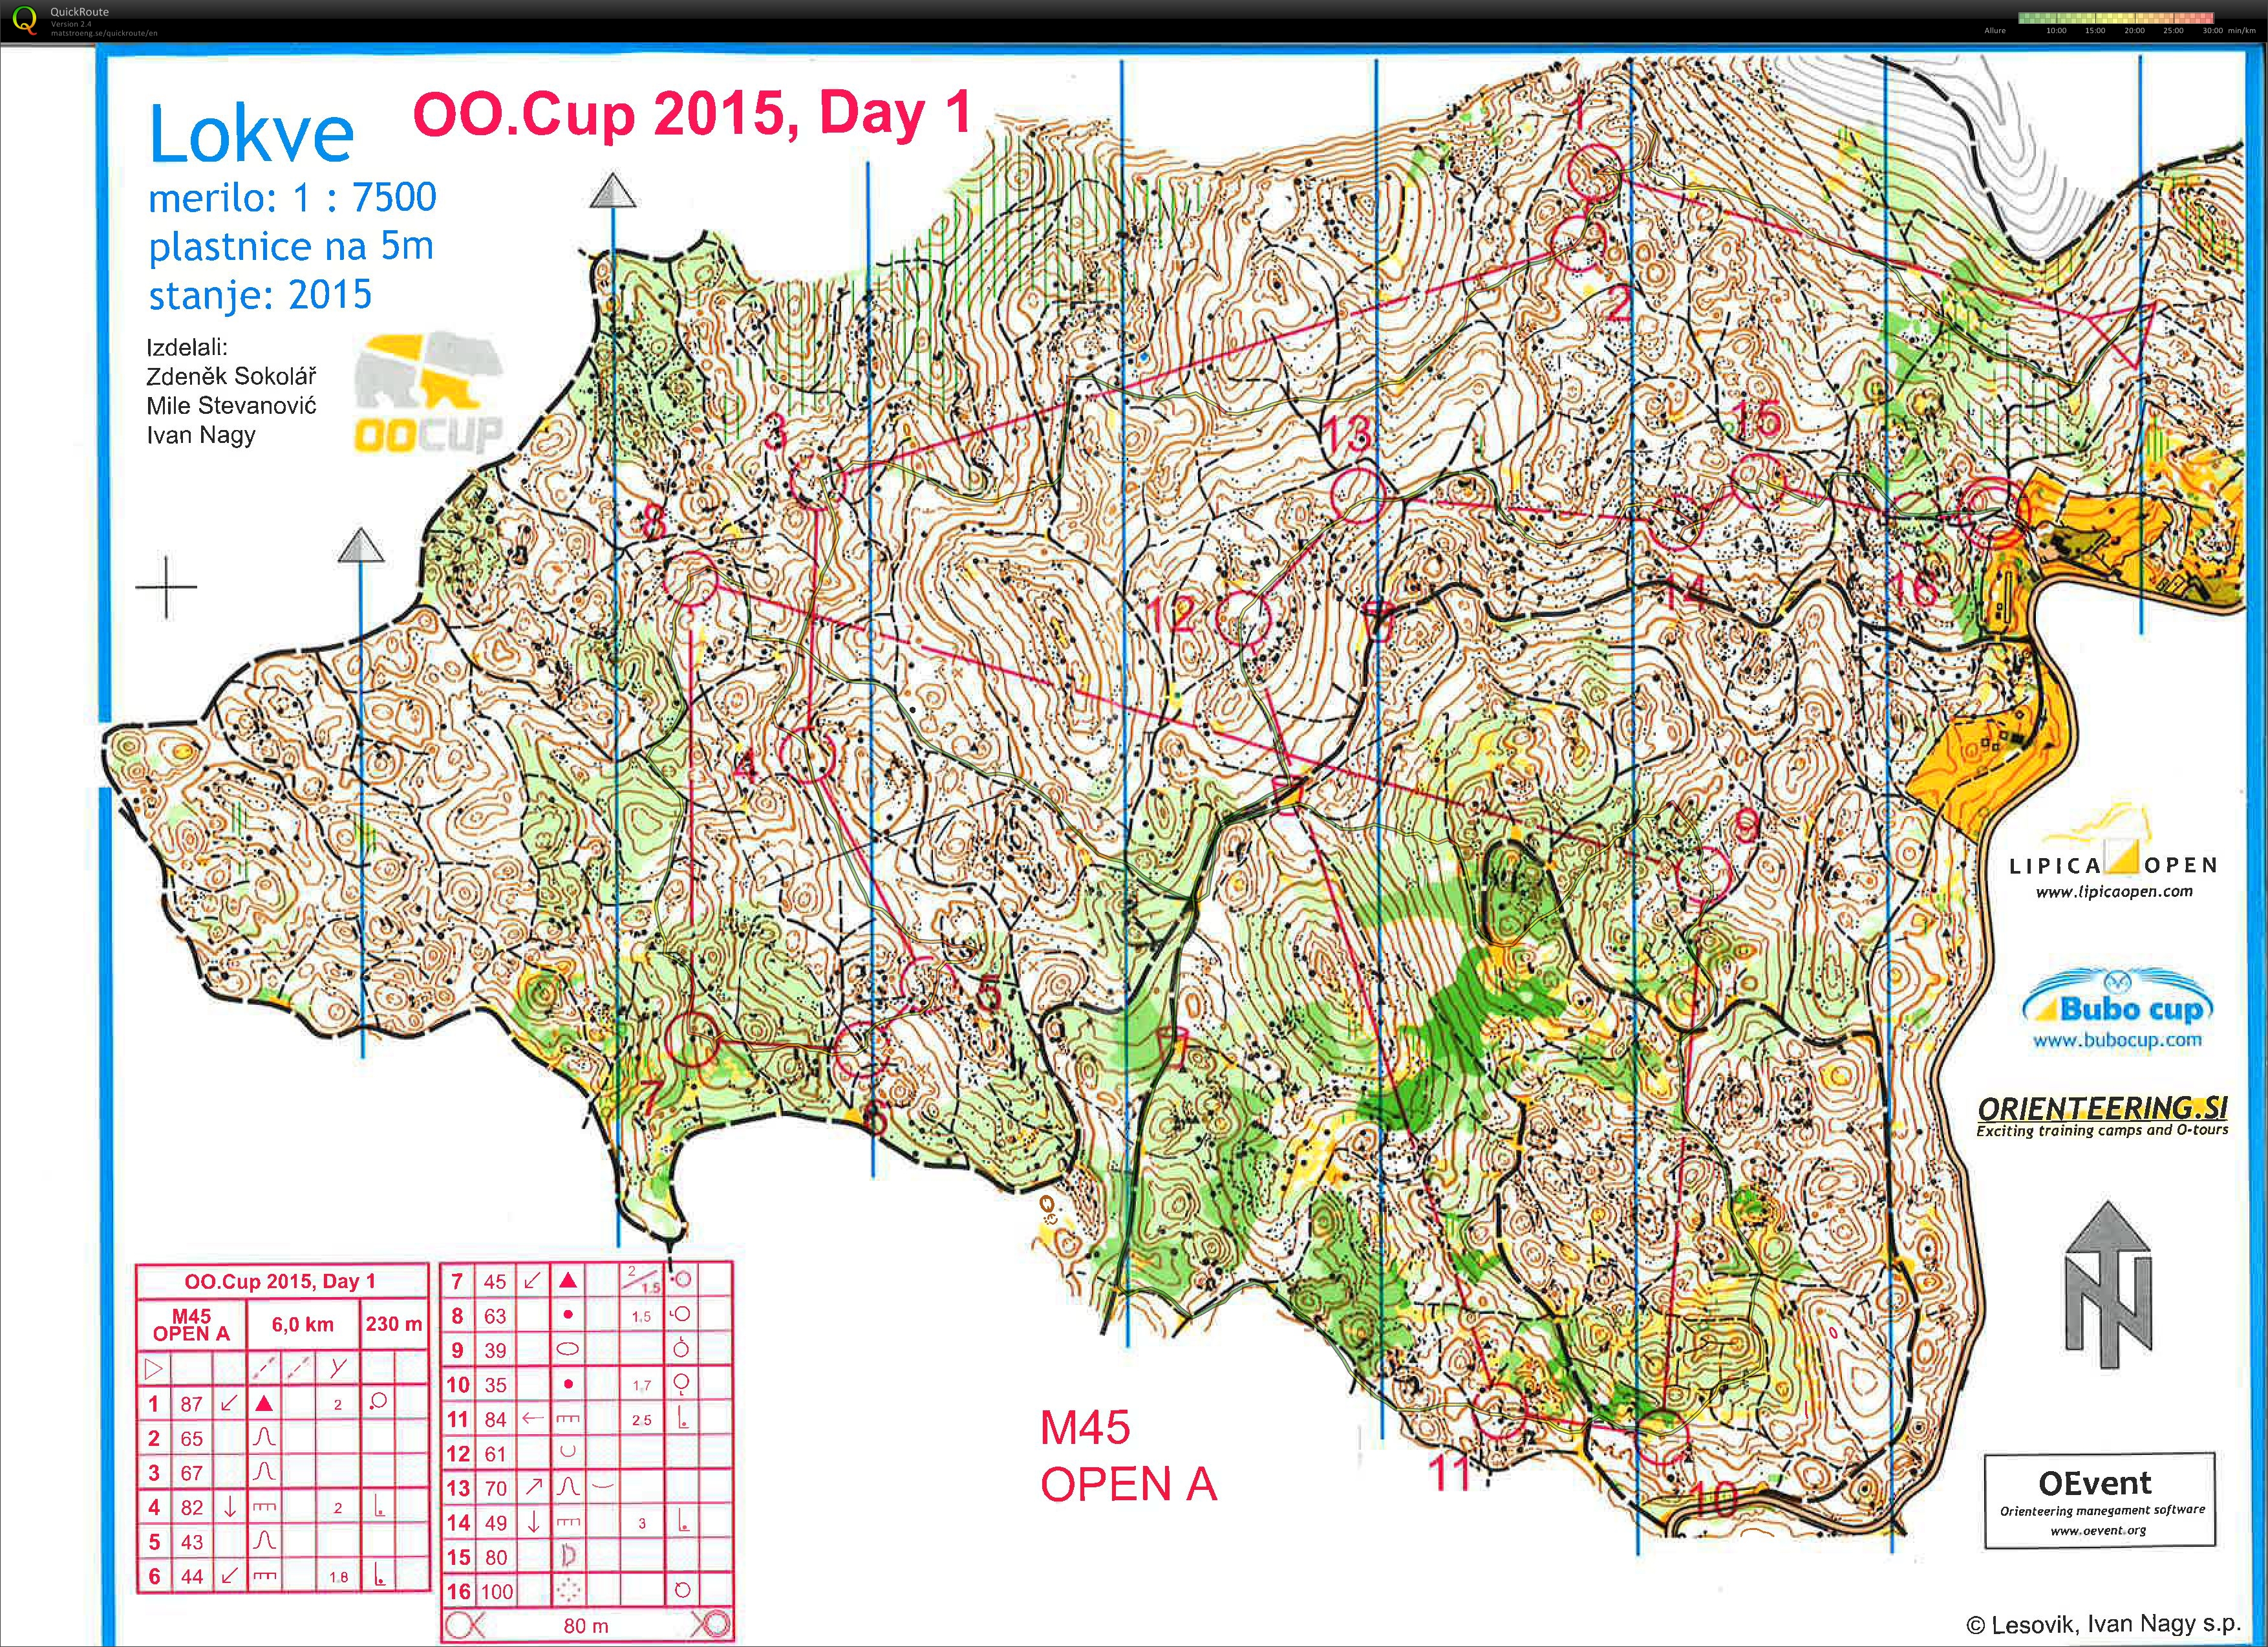 OOCup-Day1 (25/07/2015)